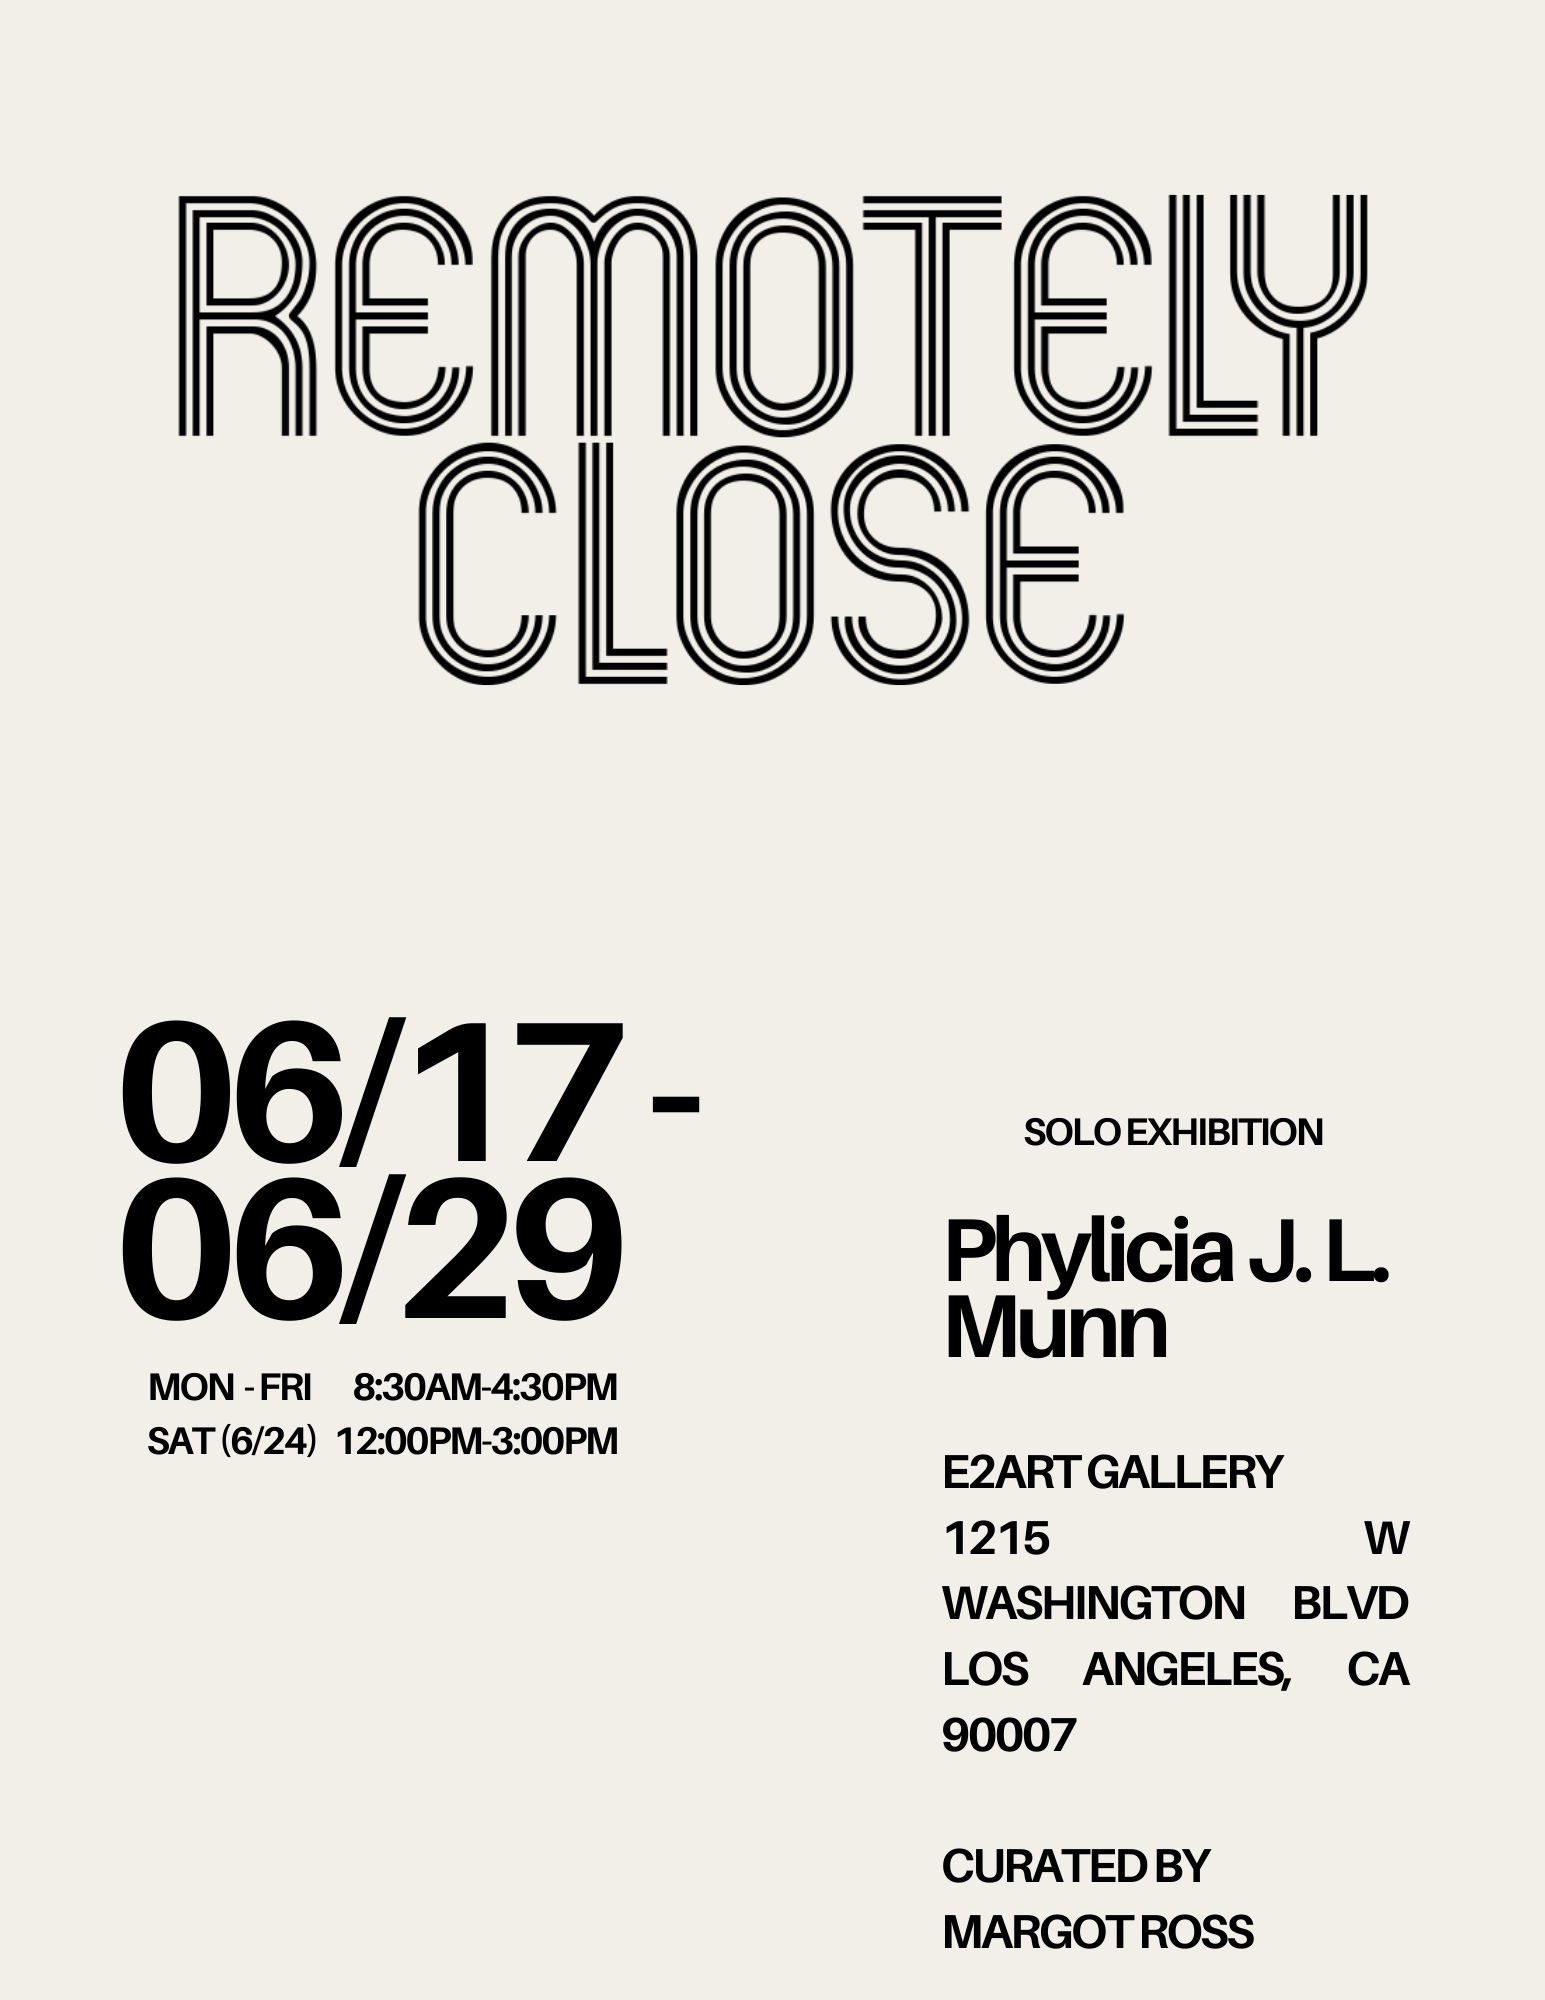 Remotely Close - 2023 Exhibition Info - 1